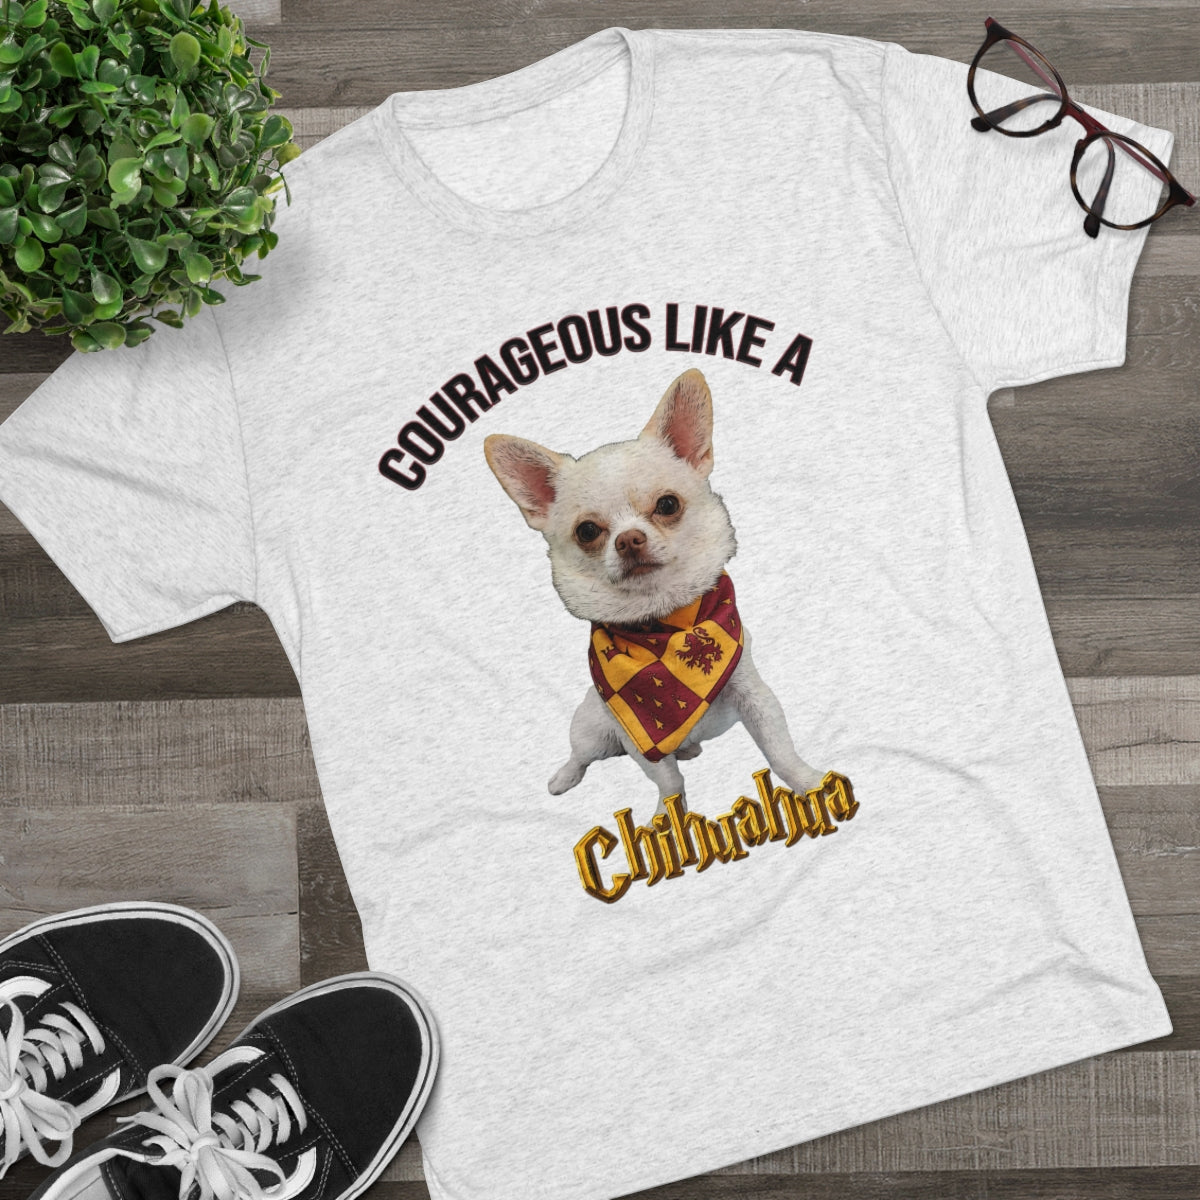 Courageous like a Chihuahua- Gryffindor Harry Potter themed- MenBrainStorm Tees